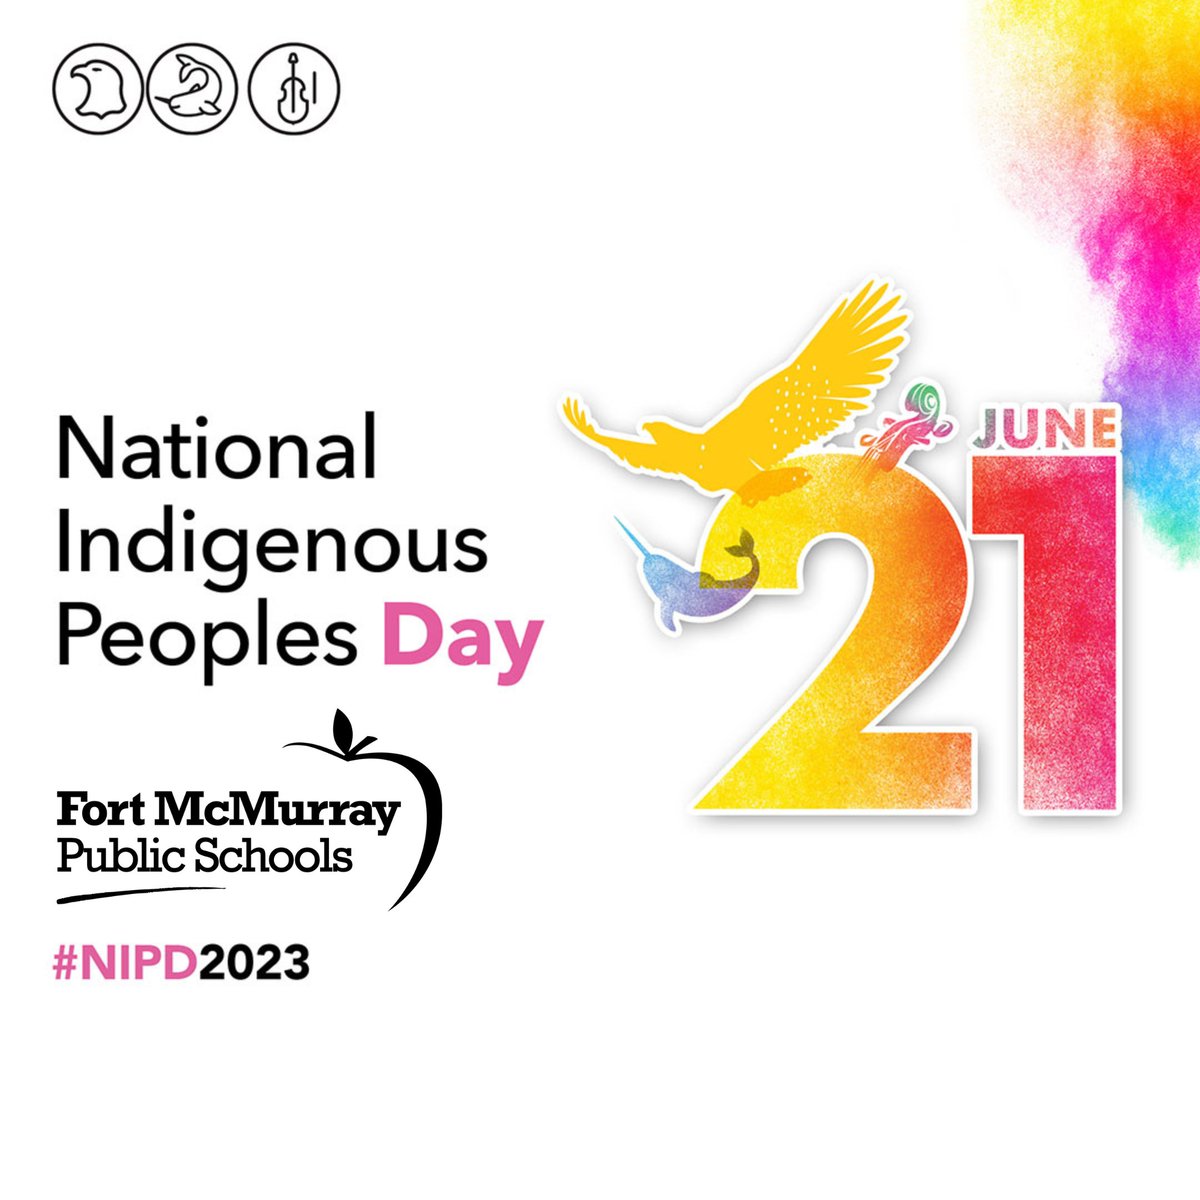 Celebrate the Rich Heritage and Diversity of First Nations, Inuit, and Métis Peoples today on National Indigenous Peoples Day, June 21. This day is dedicated to acknowledging their remarkable impact and contributions to society. @annaleeskinner @indigenousFMPSD #FMPSD #YMM